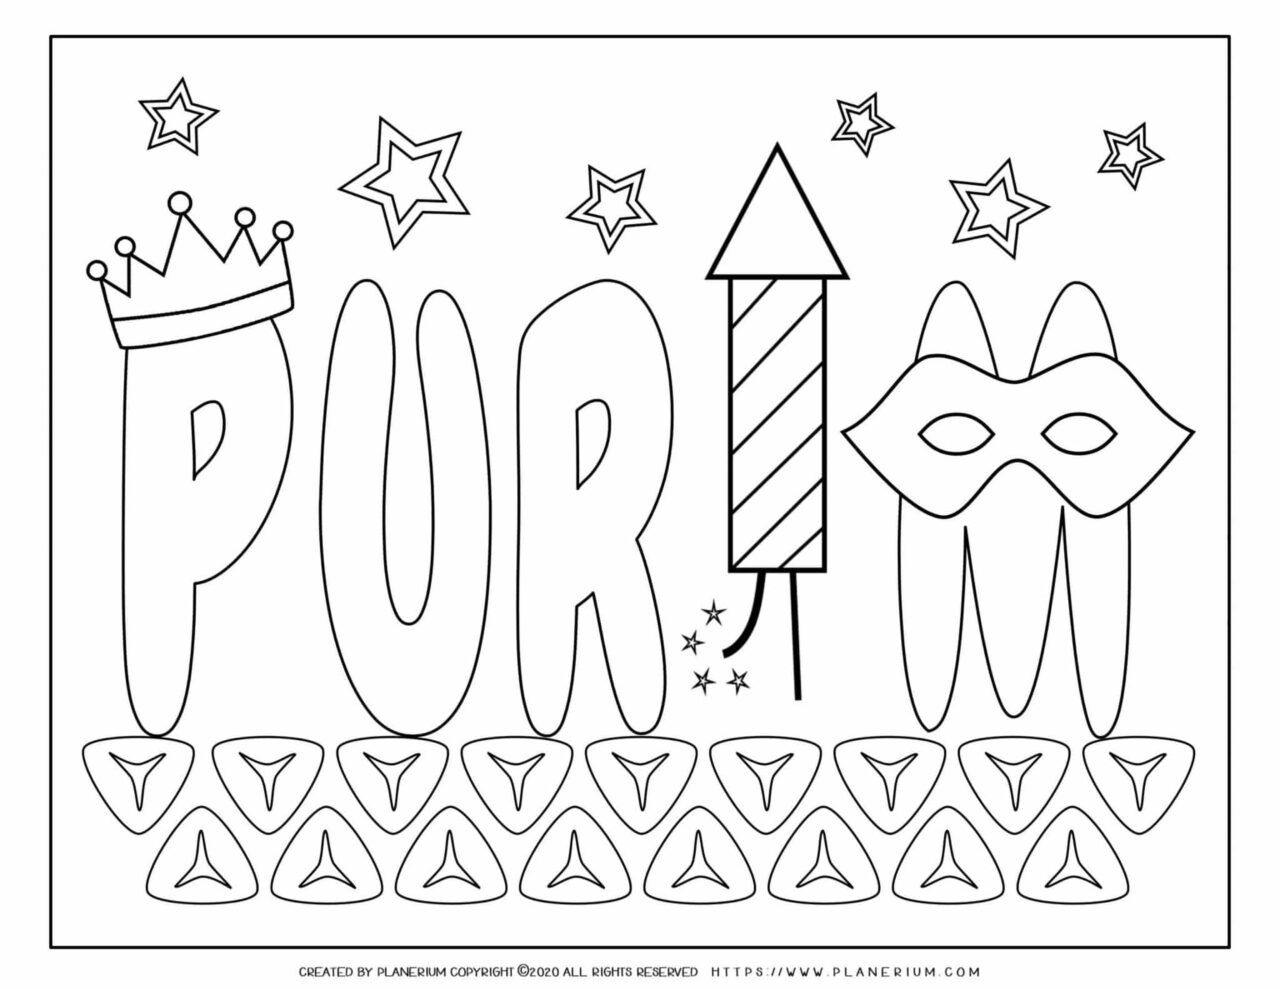 Purim 2020 - Coloring - Purim title on Hamantaschen